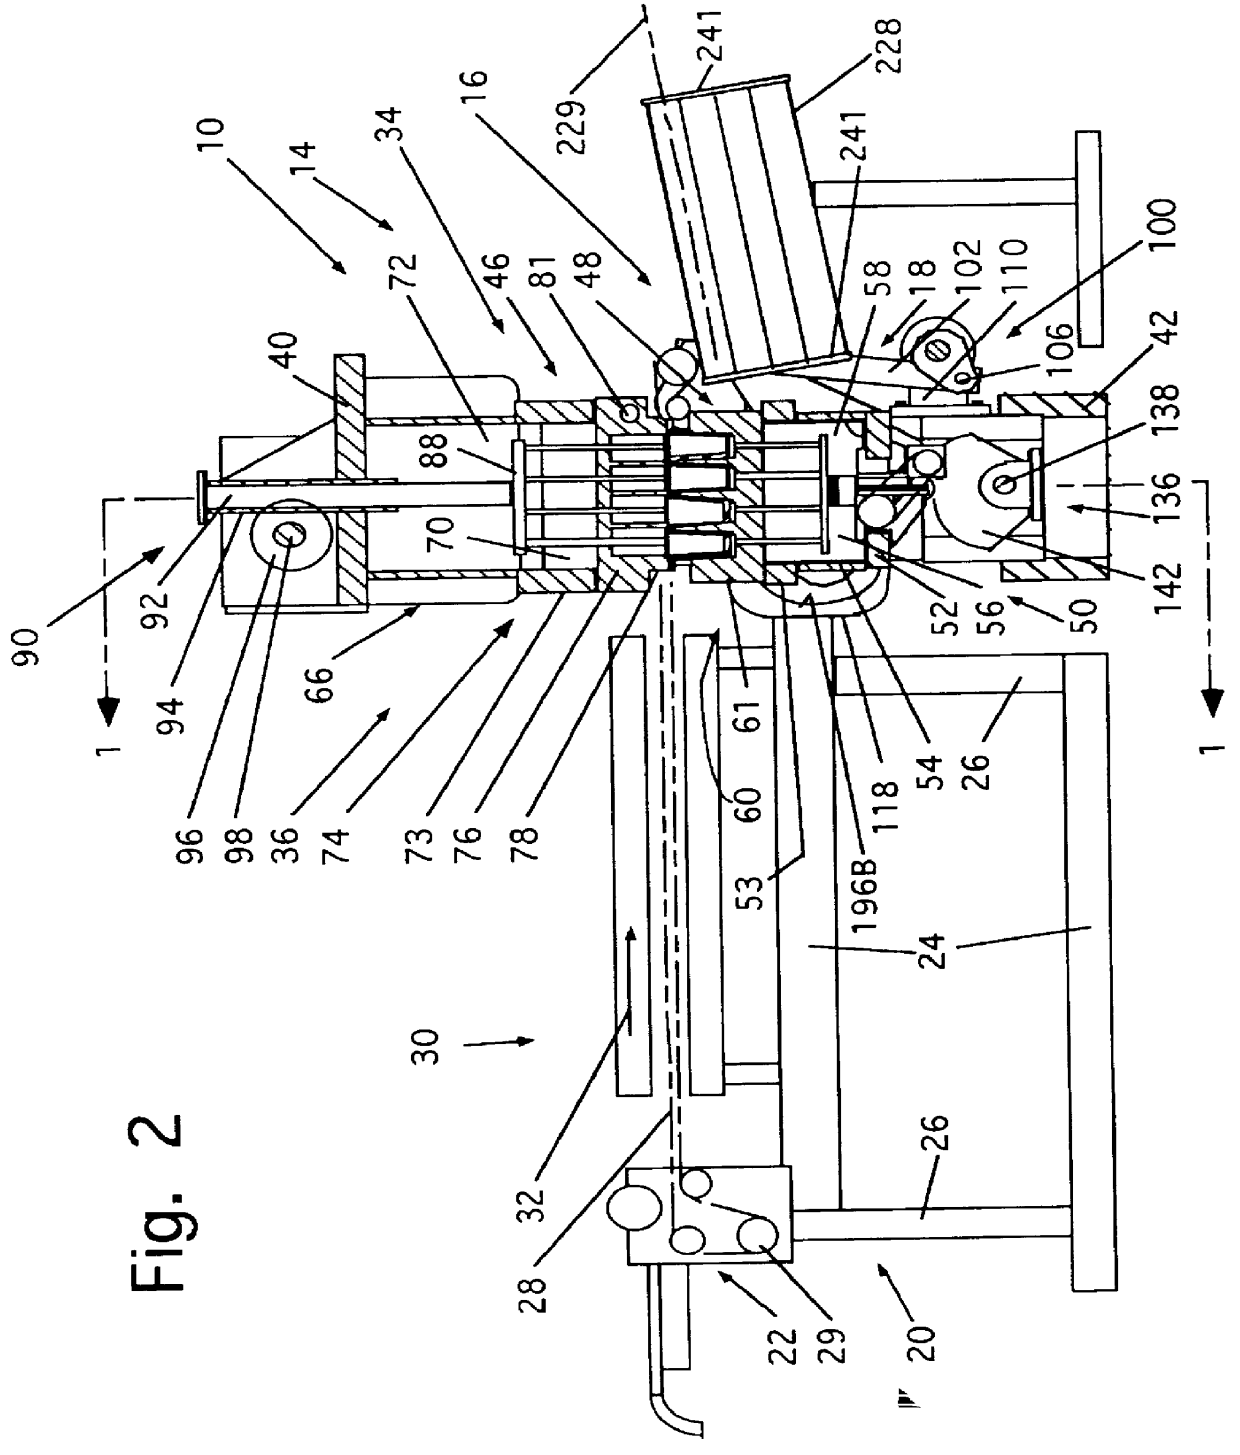 Differential pressure forming, trimming and stacking apparatus